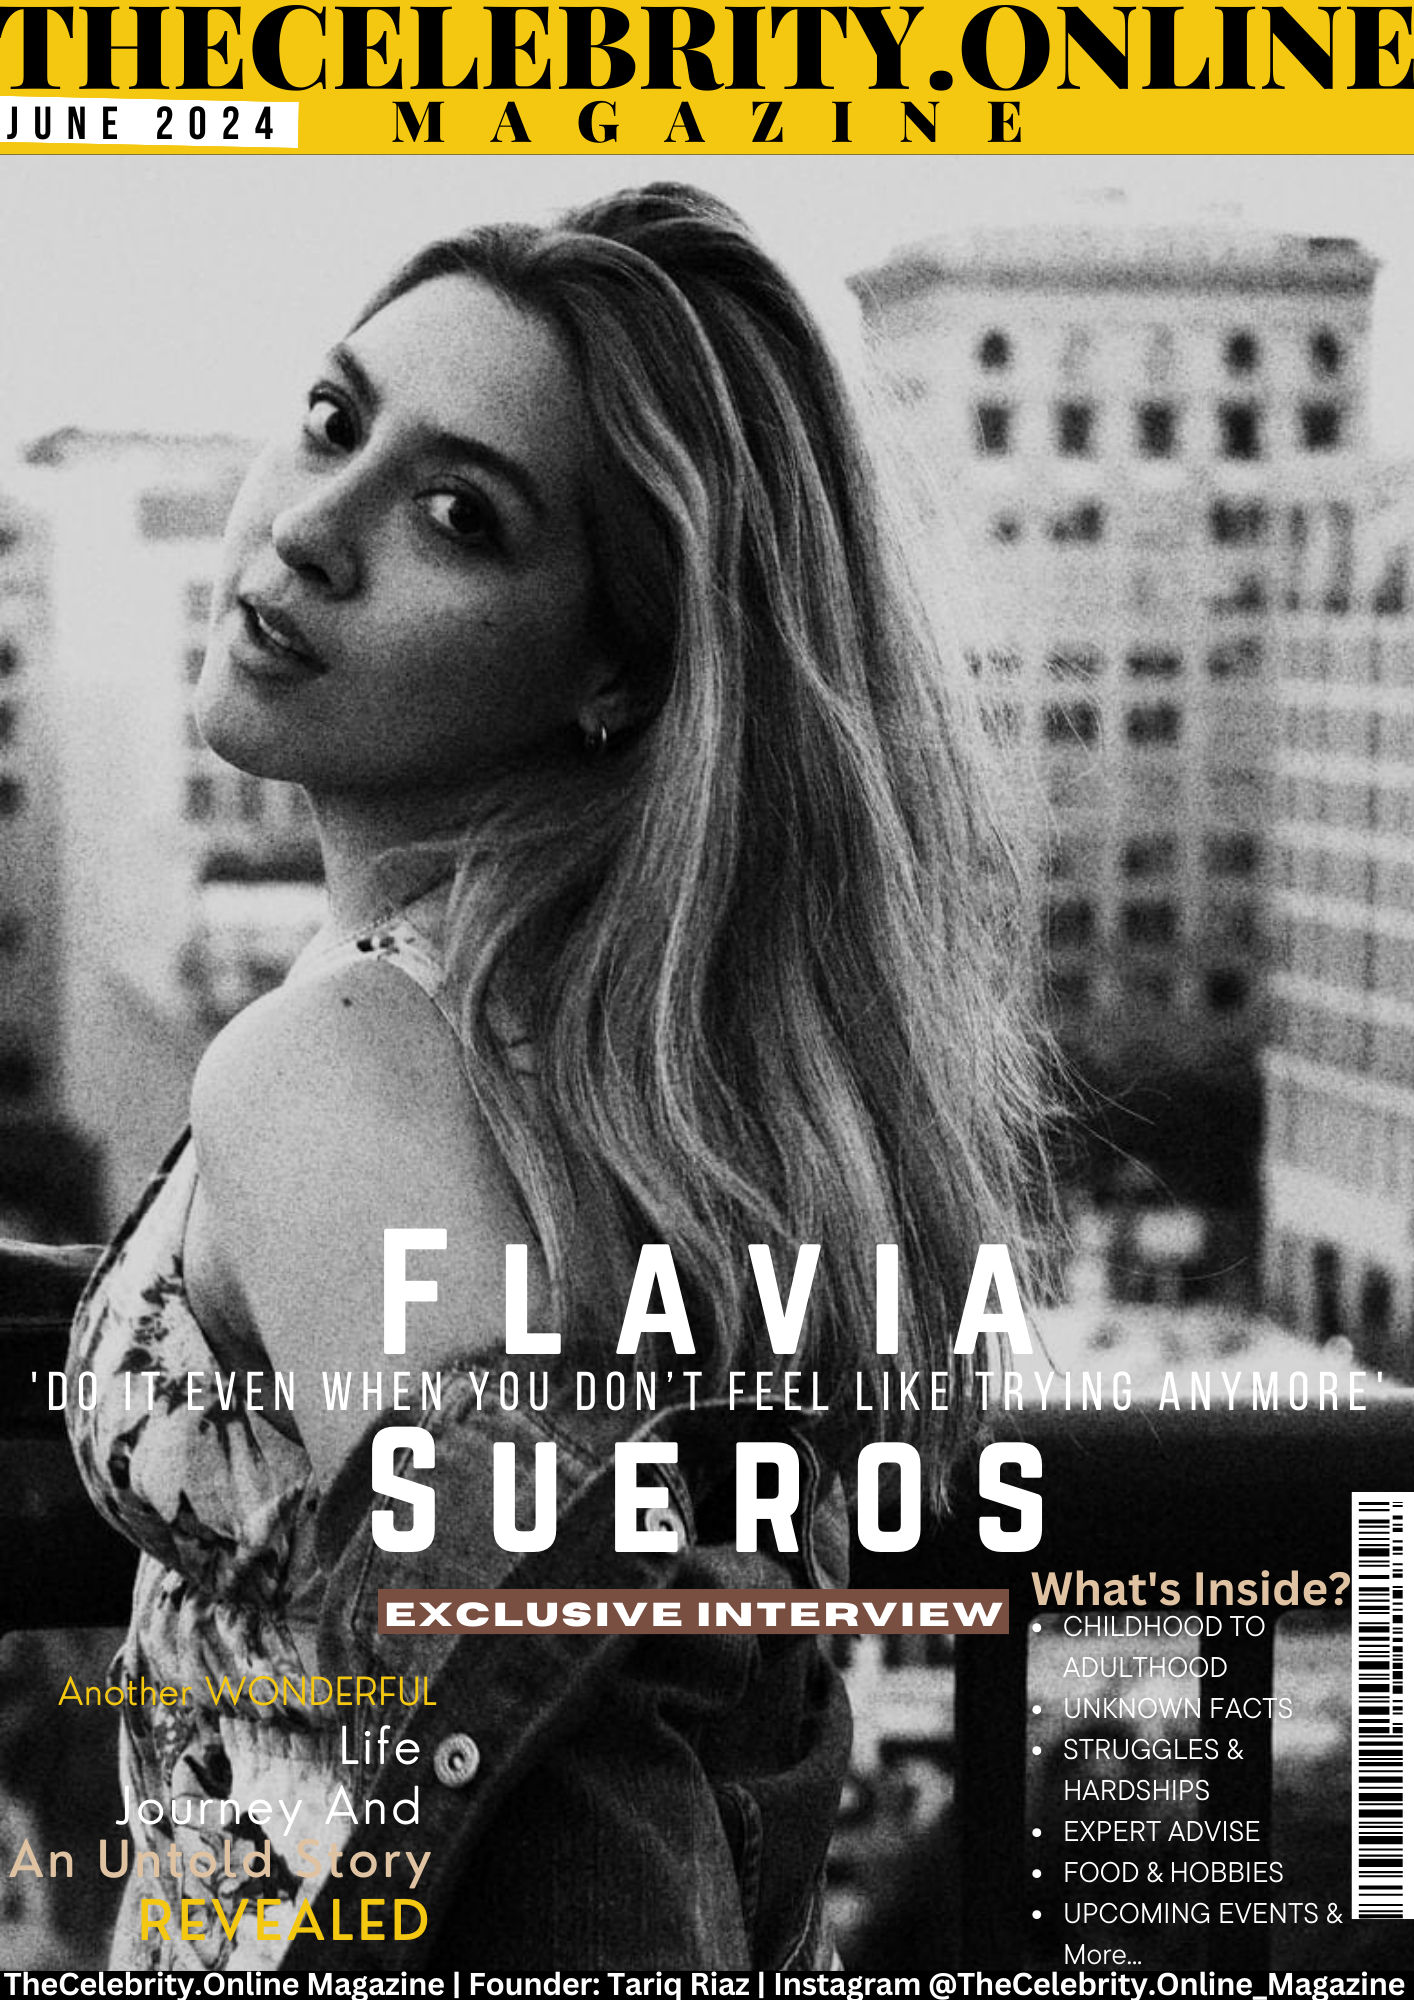 Flavia Sueros Exclusive Interview – ‘Do It Even When You Don’t Feel Like Trying Anymore’